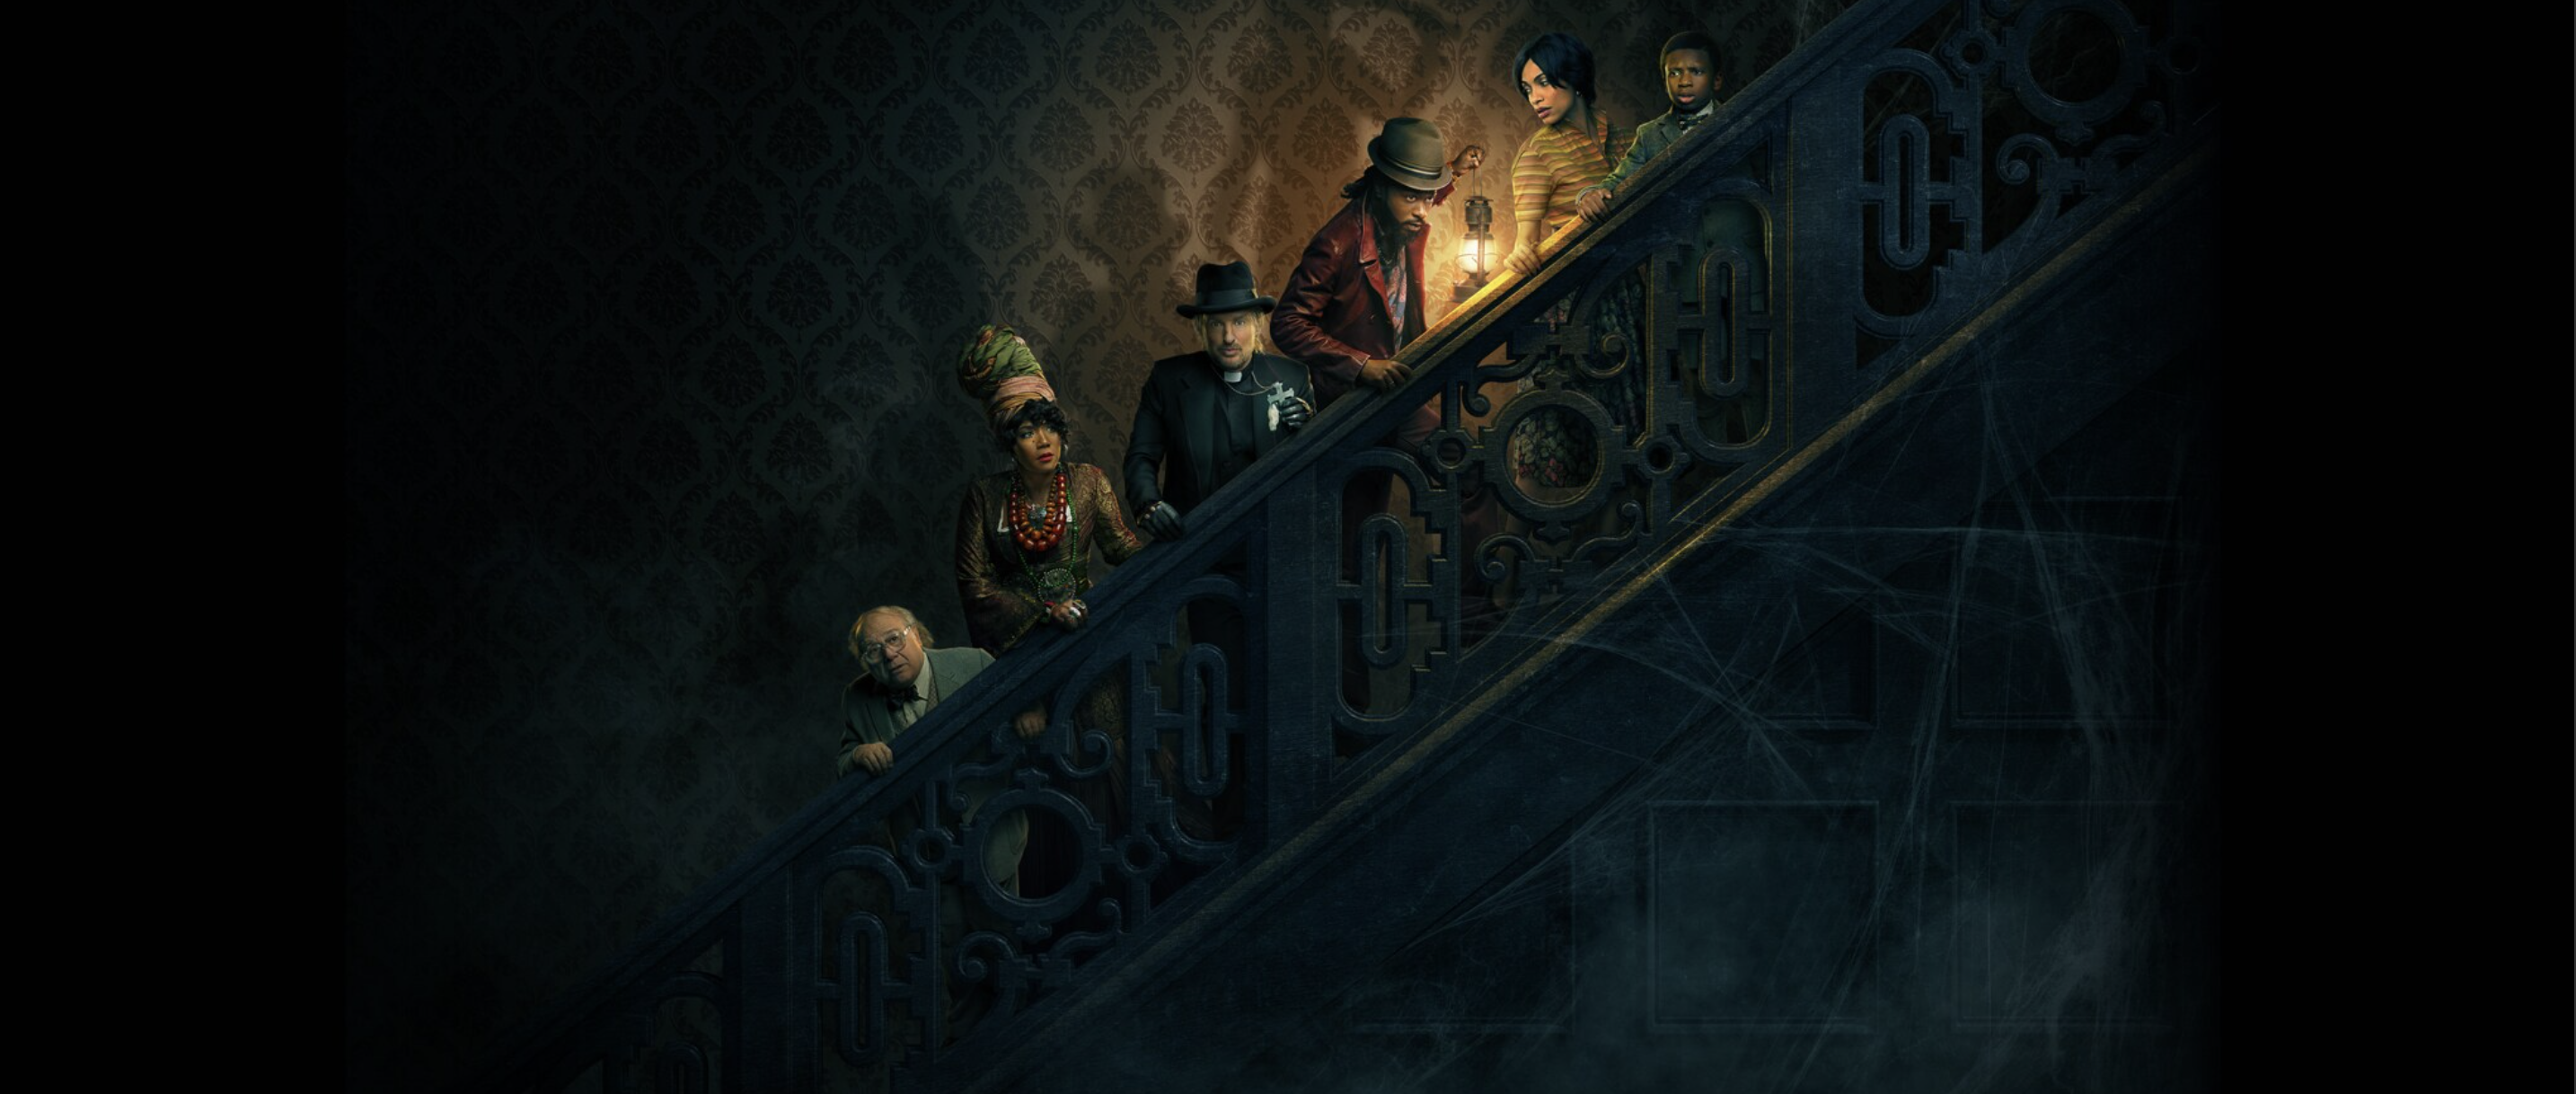 ‘Haunted Mansion’ Struggles to Find Scares and Humor – Review